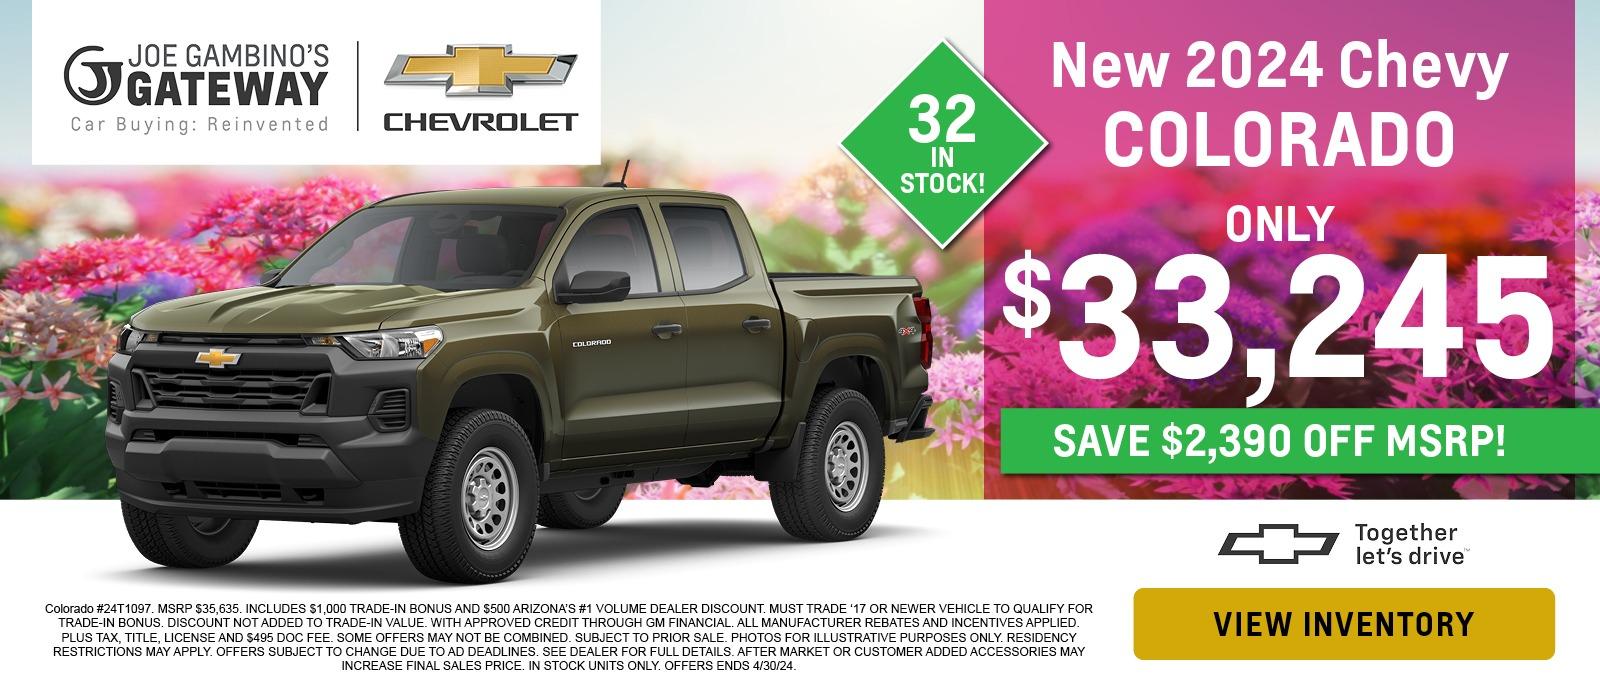 New 2024 Chevy Colorado
Only $33,245
Save $2,390 off MSRP!